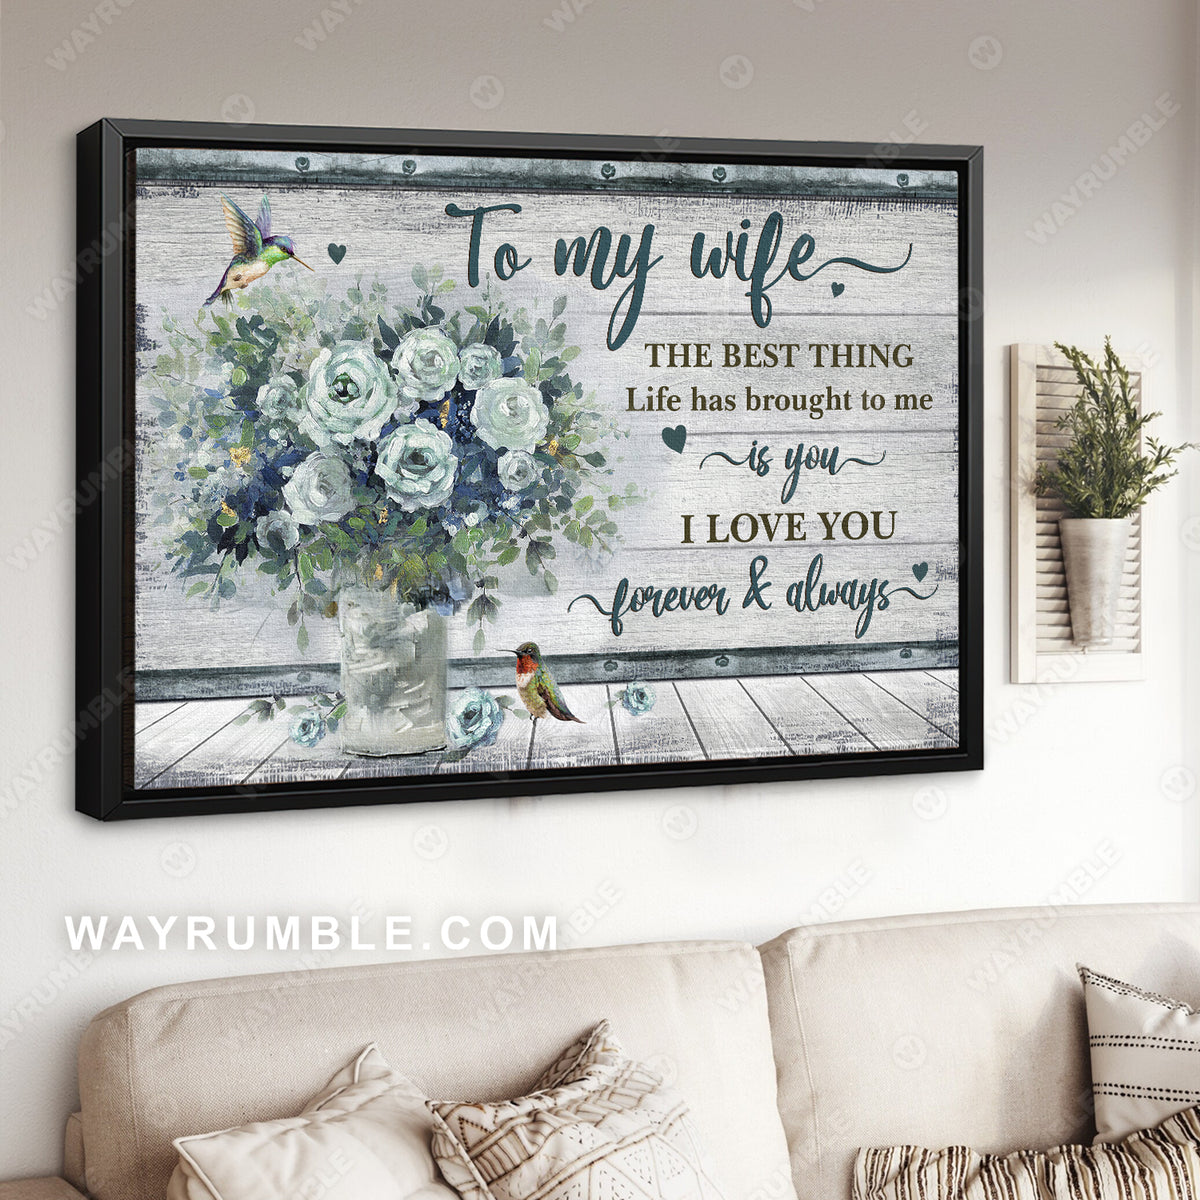 To my wife, Rose vase, Still painting, Vintage painting, The best thing  life has brought to me is you - Couple Landscape Canvas Prints, Wall Art